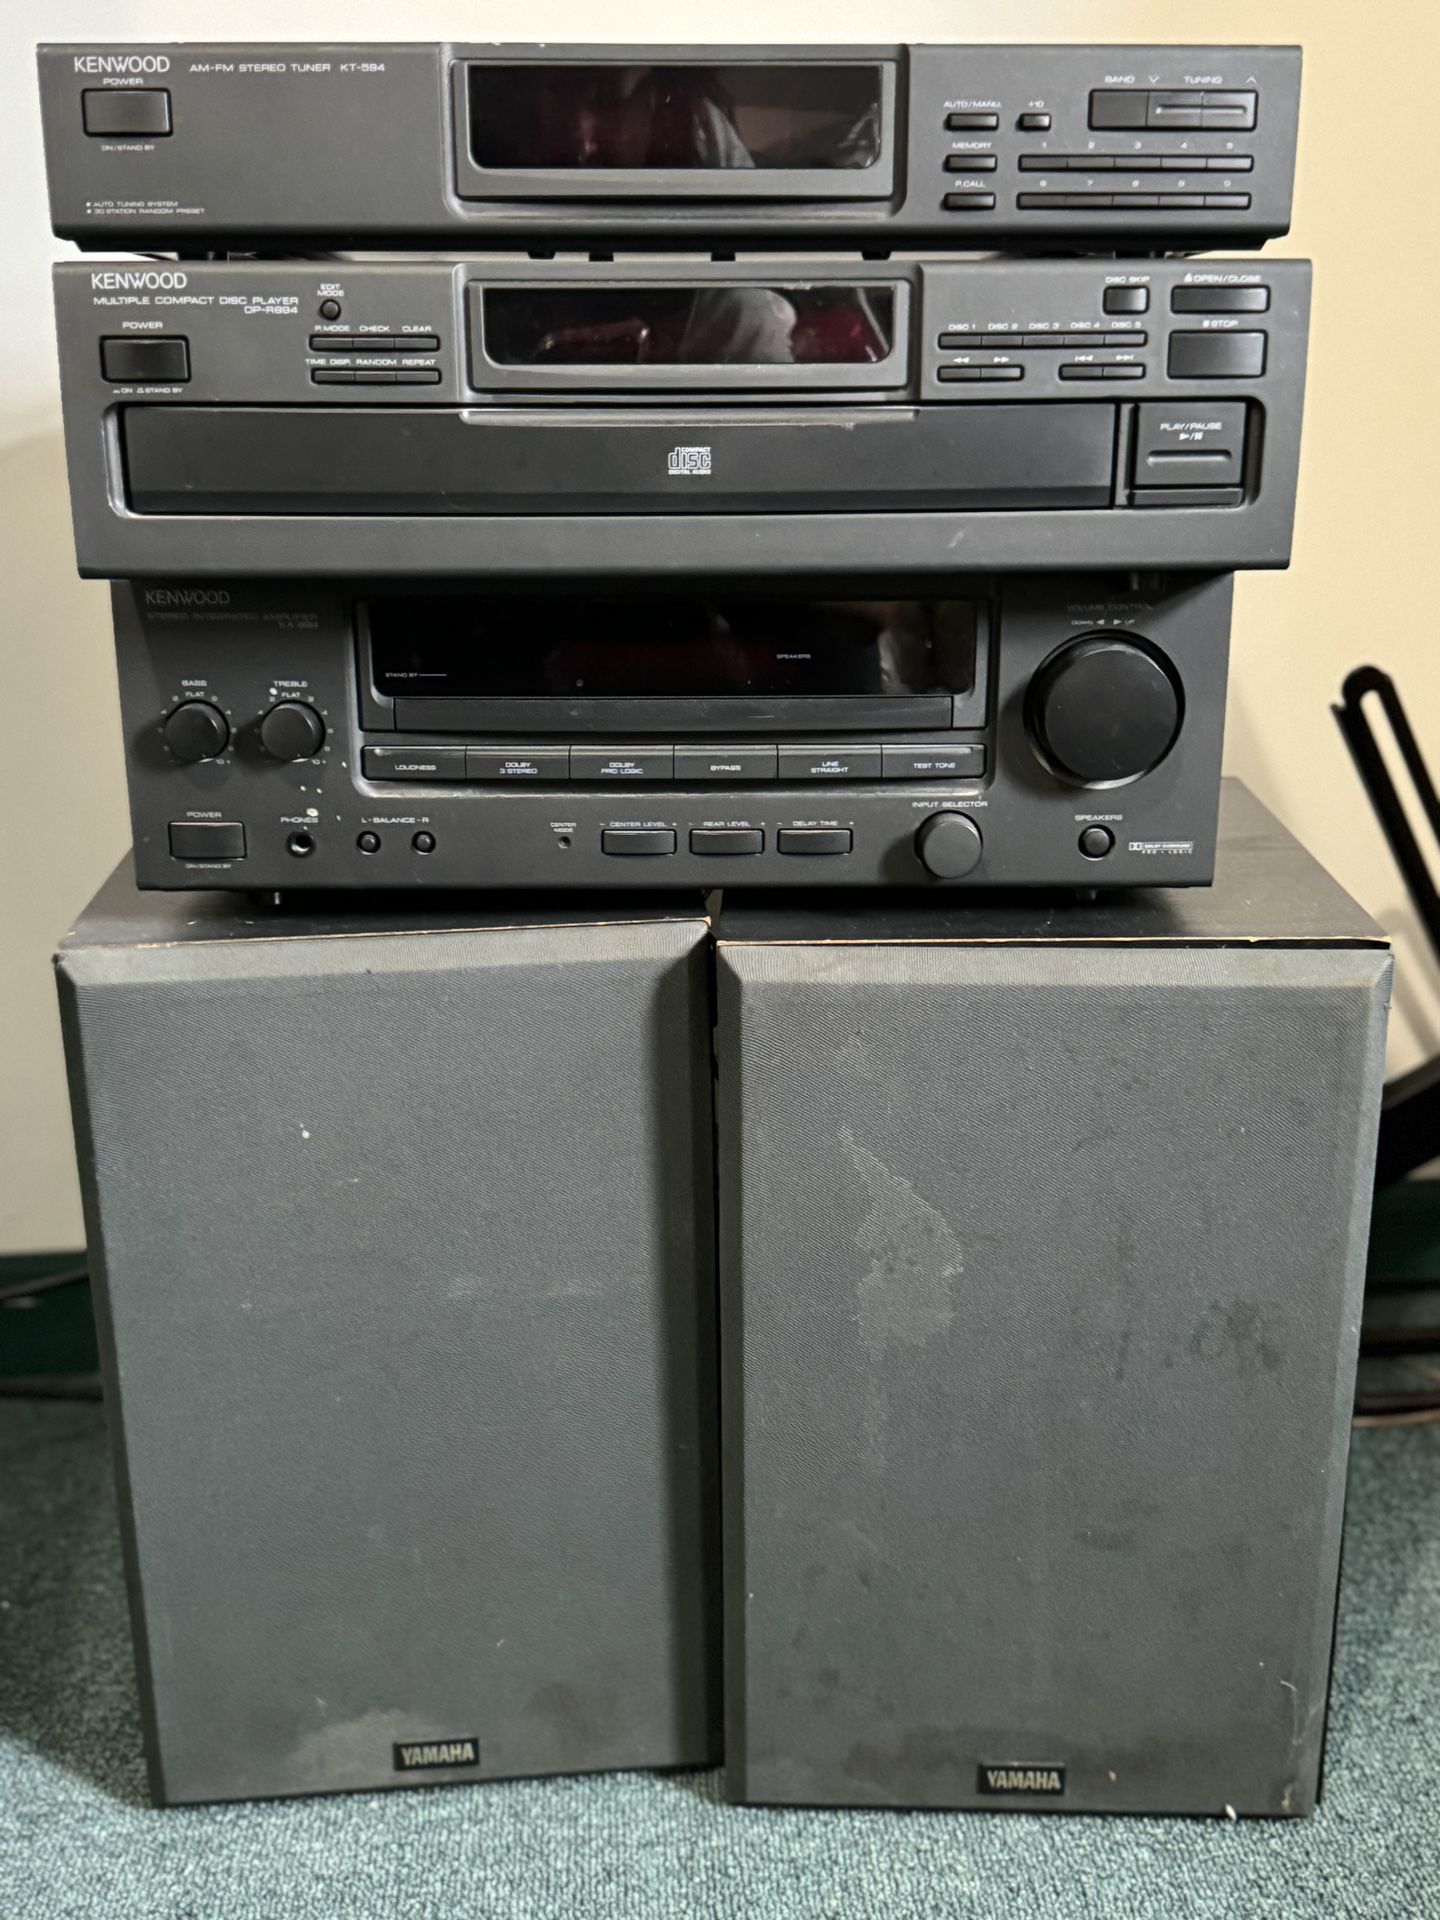 KENWOOD Stereo with CD Player